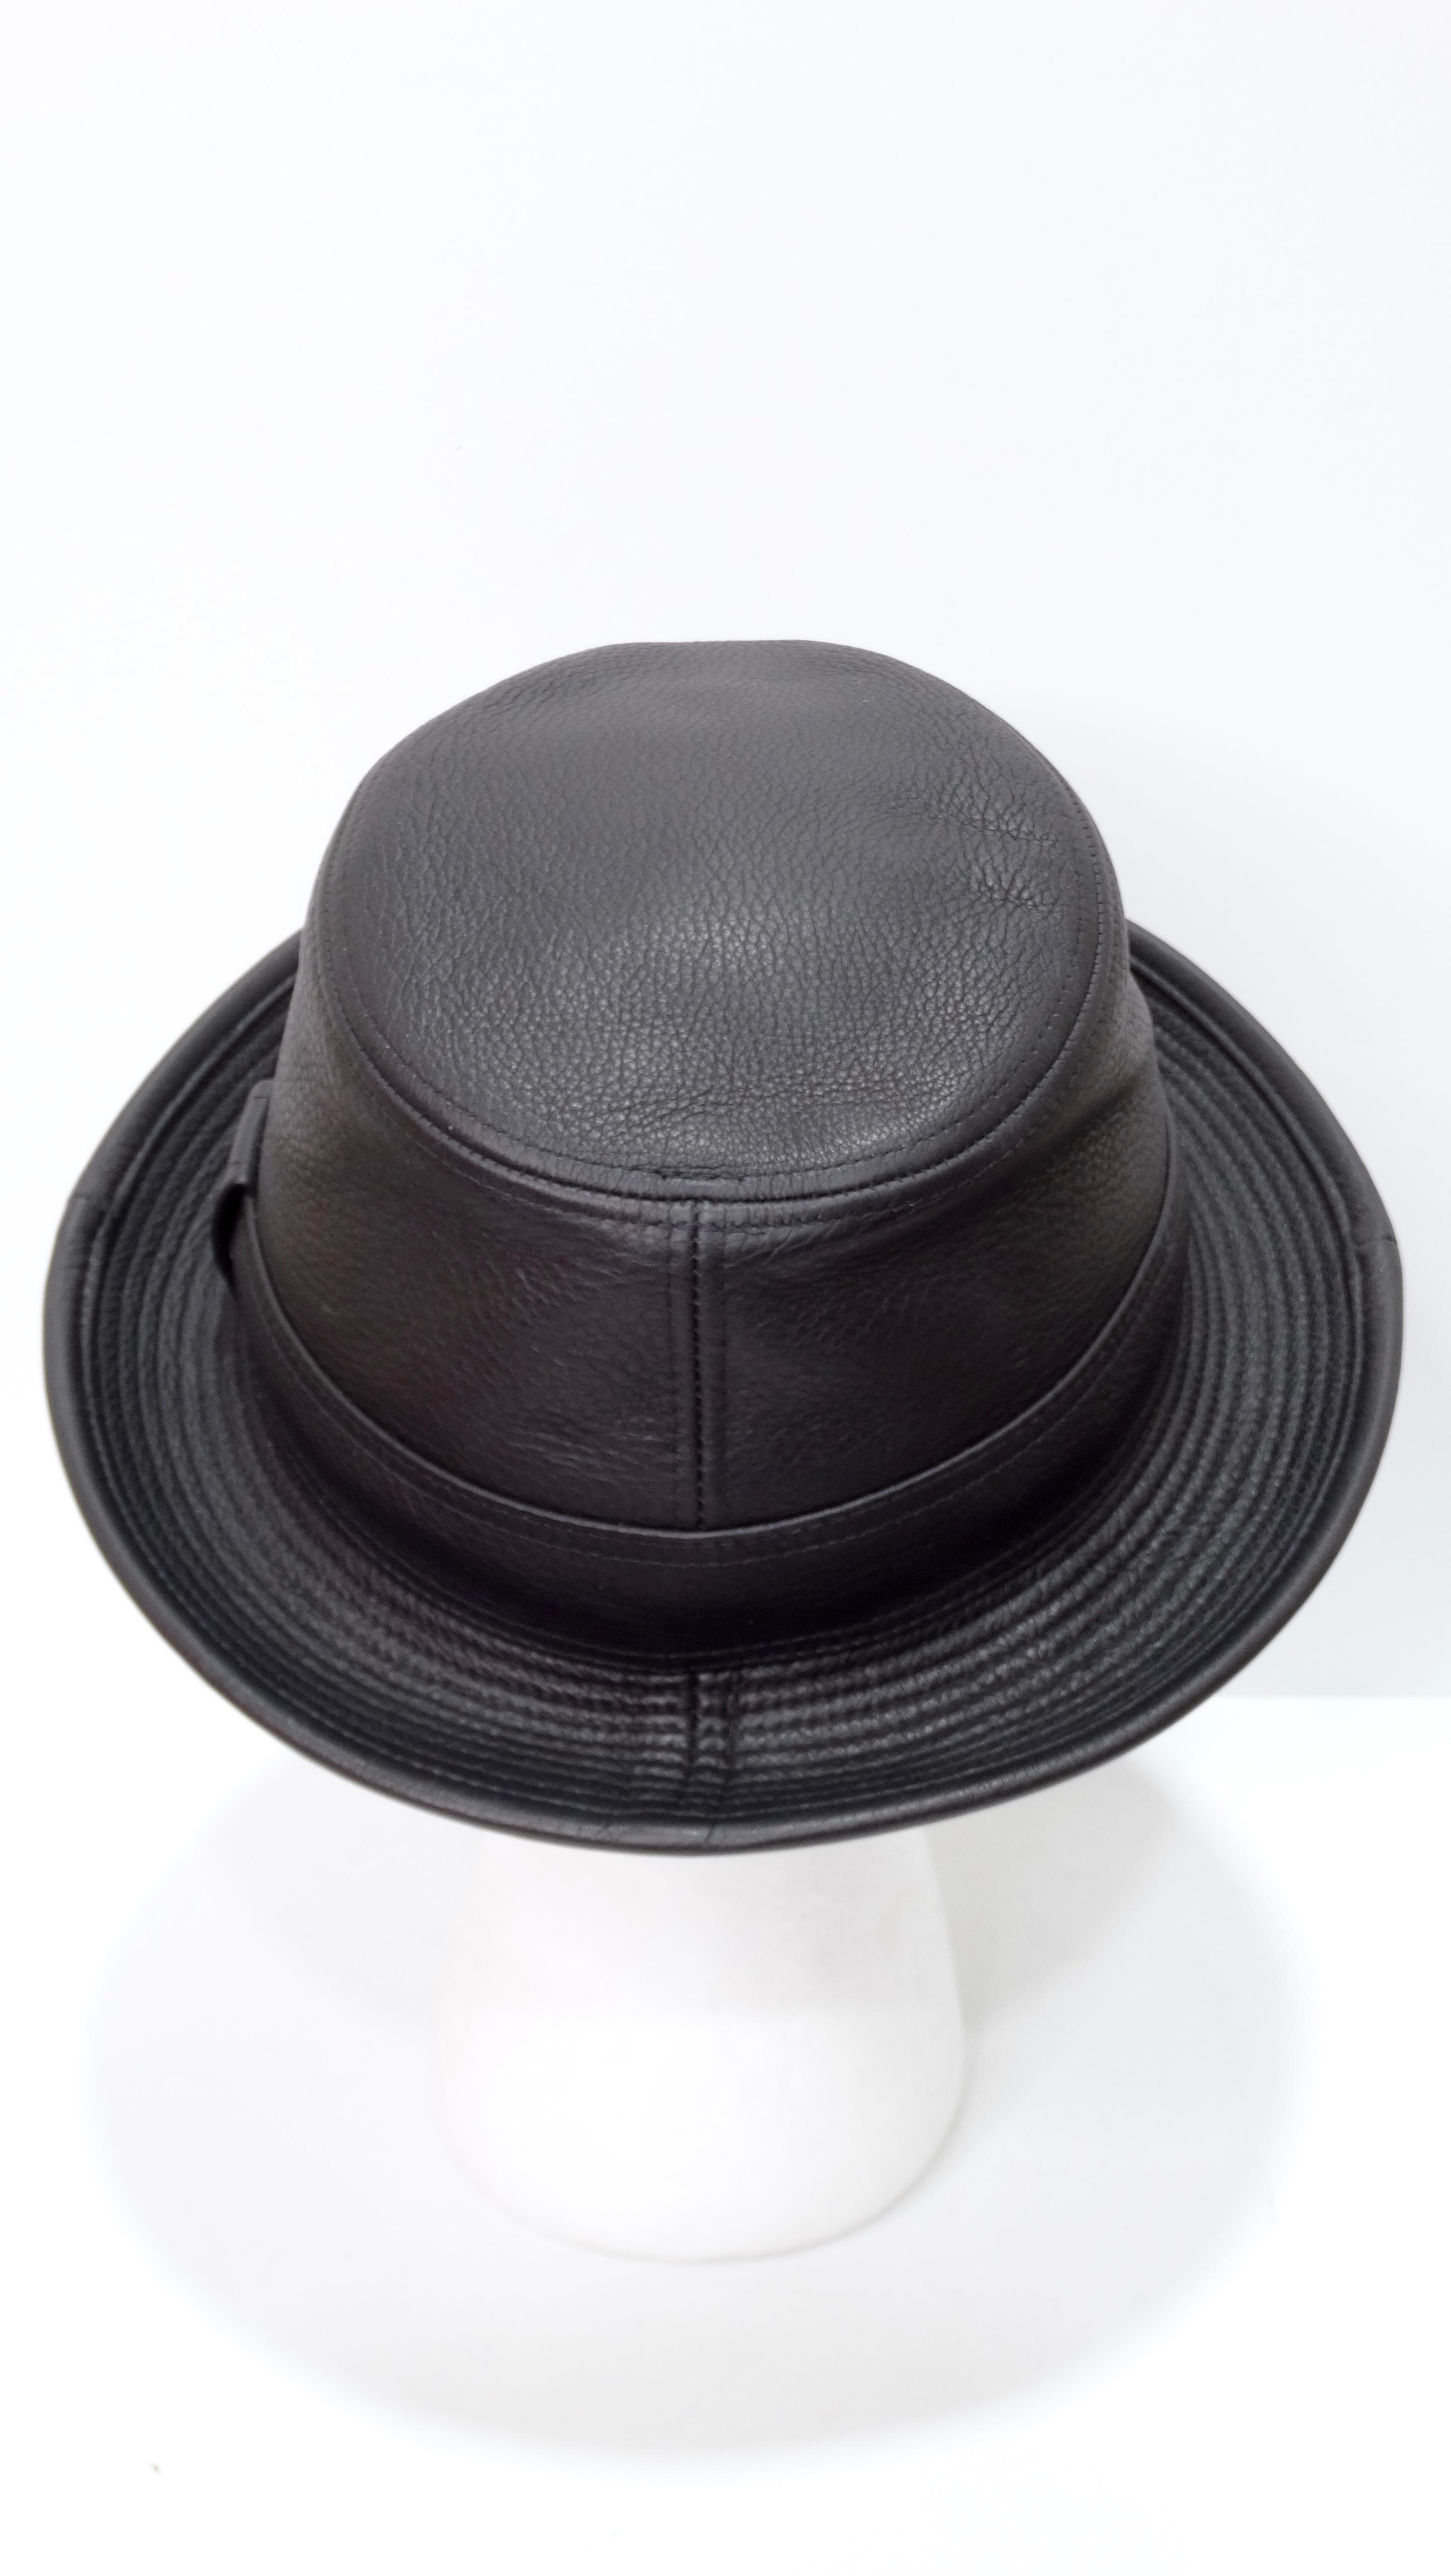 The fall season is arriving quickly. This Hermes Clémence Leather Hat In Black Taurillon is perfect for anyone to add a layer of coverage while still maintaining a sleek and stylish look. With this classic Hermes leather hat, your are sure to be